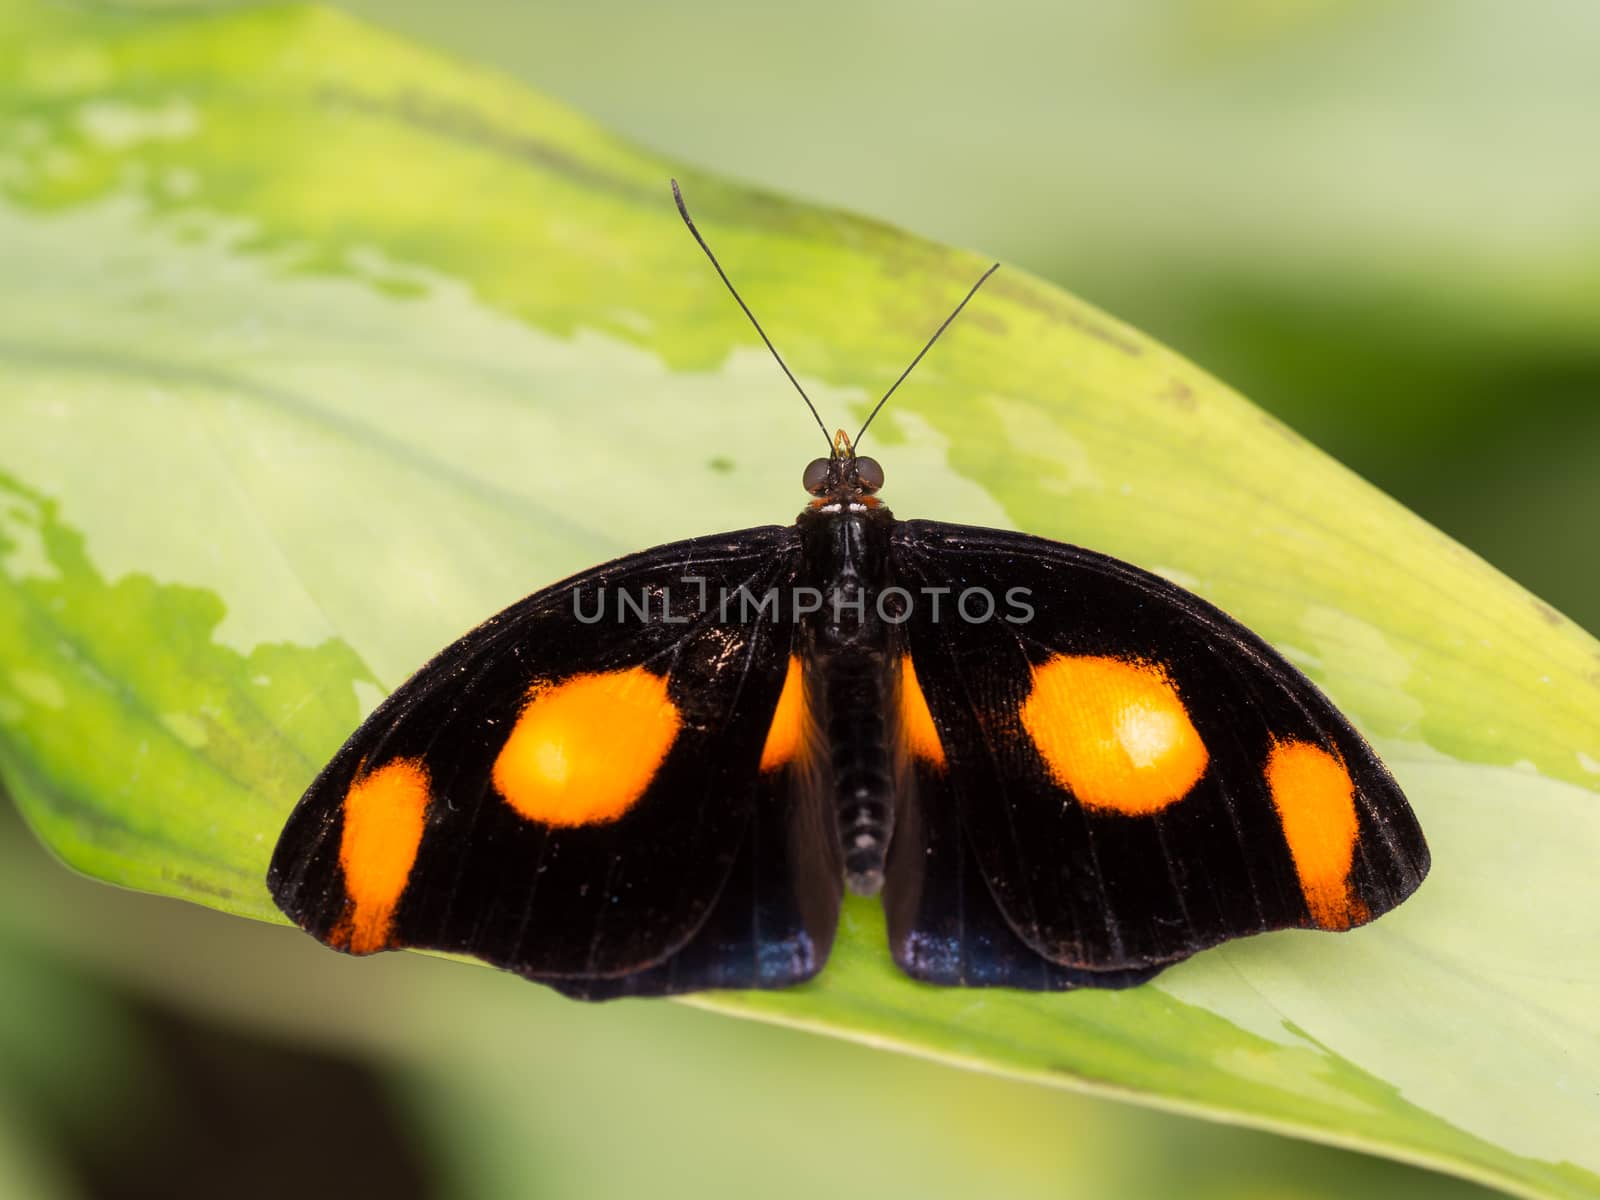 Black and orange spotted tropical butterfly showing full wingspa by frankhoekzema